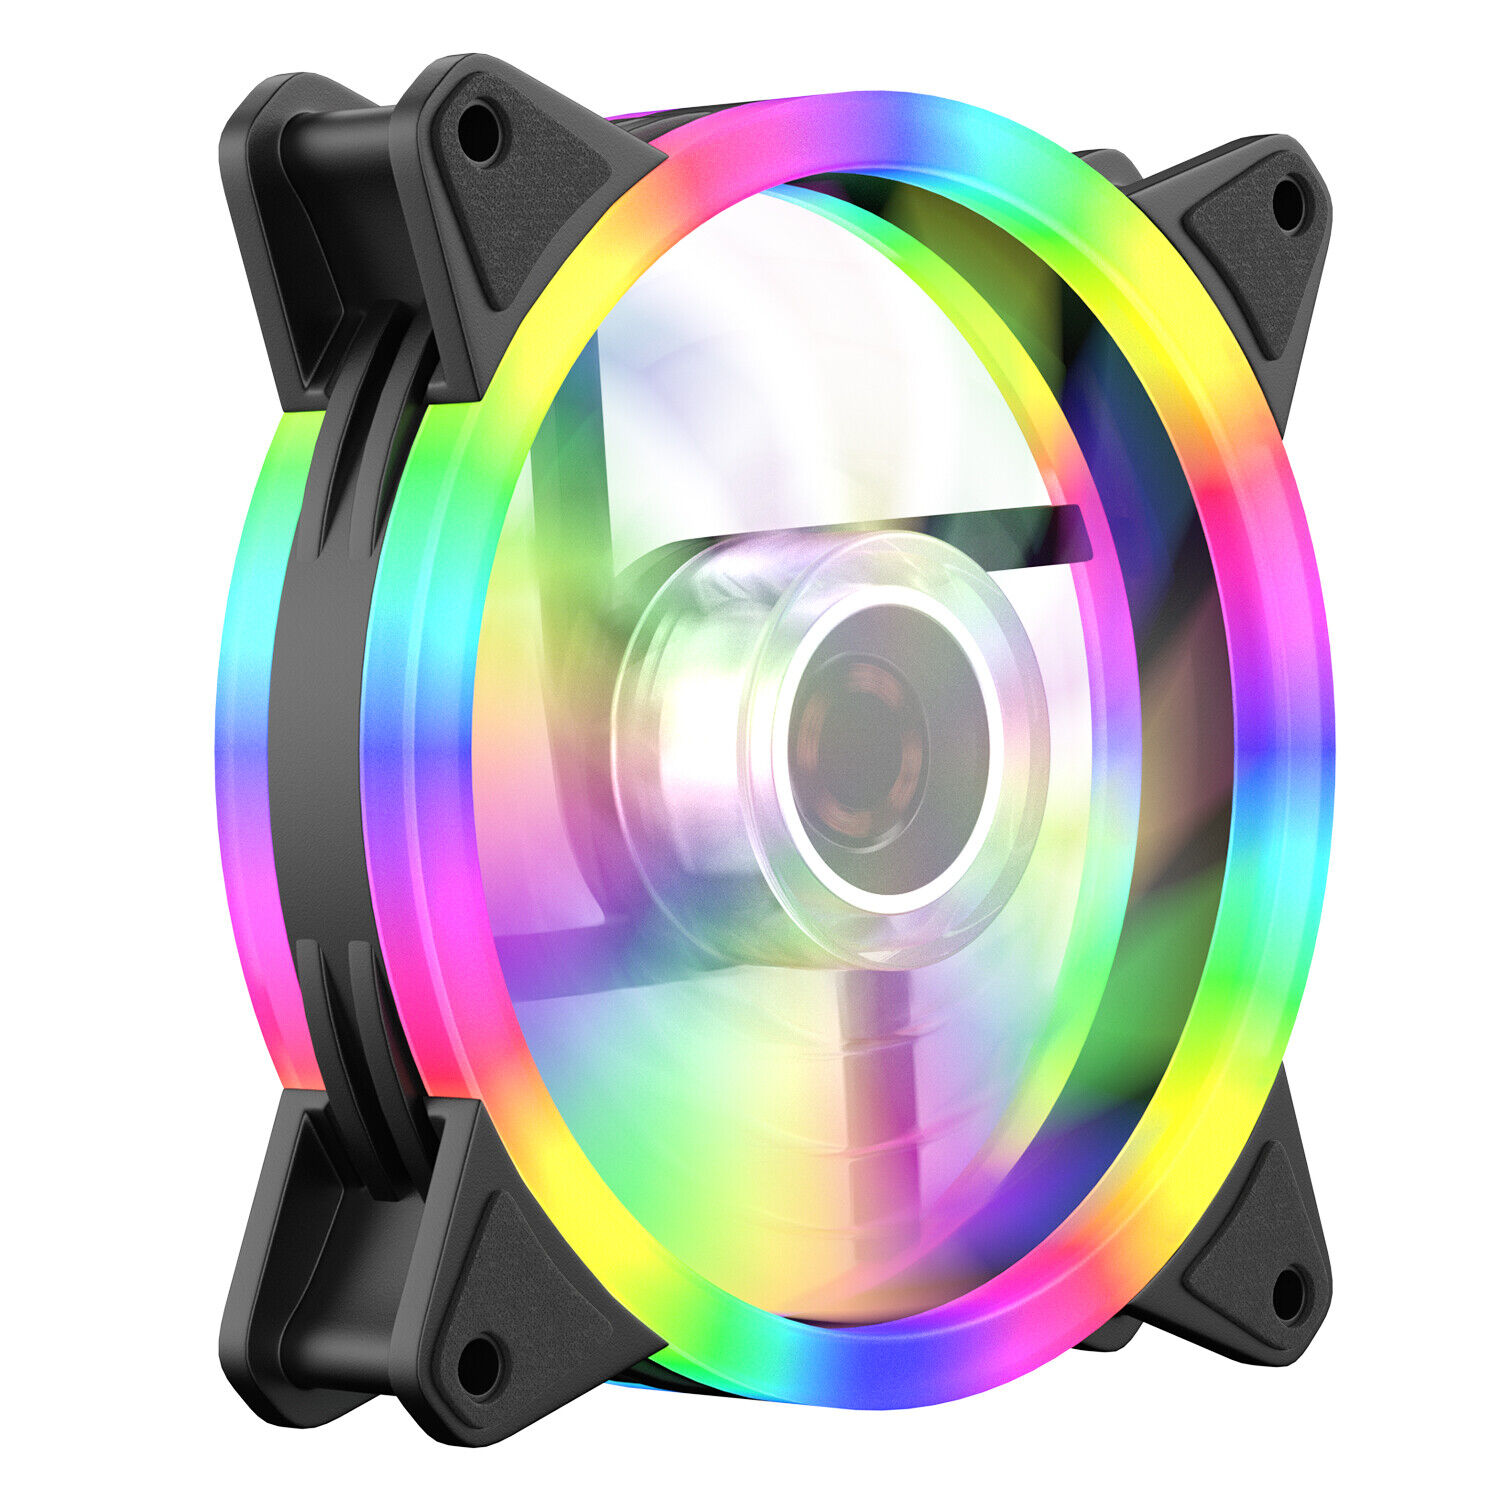 4-pin High Airflow Colorful Quiet Dustproof Slipproof Abrasion Computer Case Fan